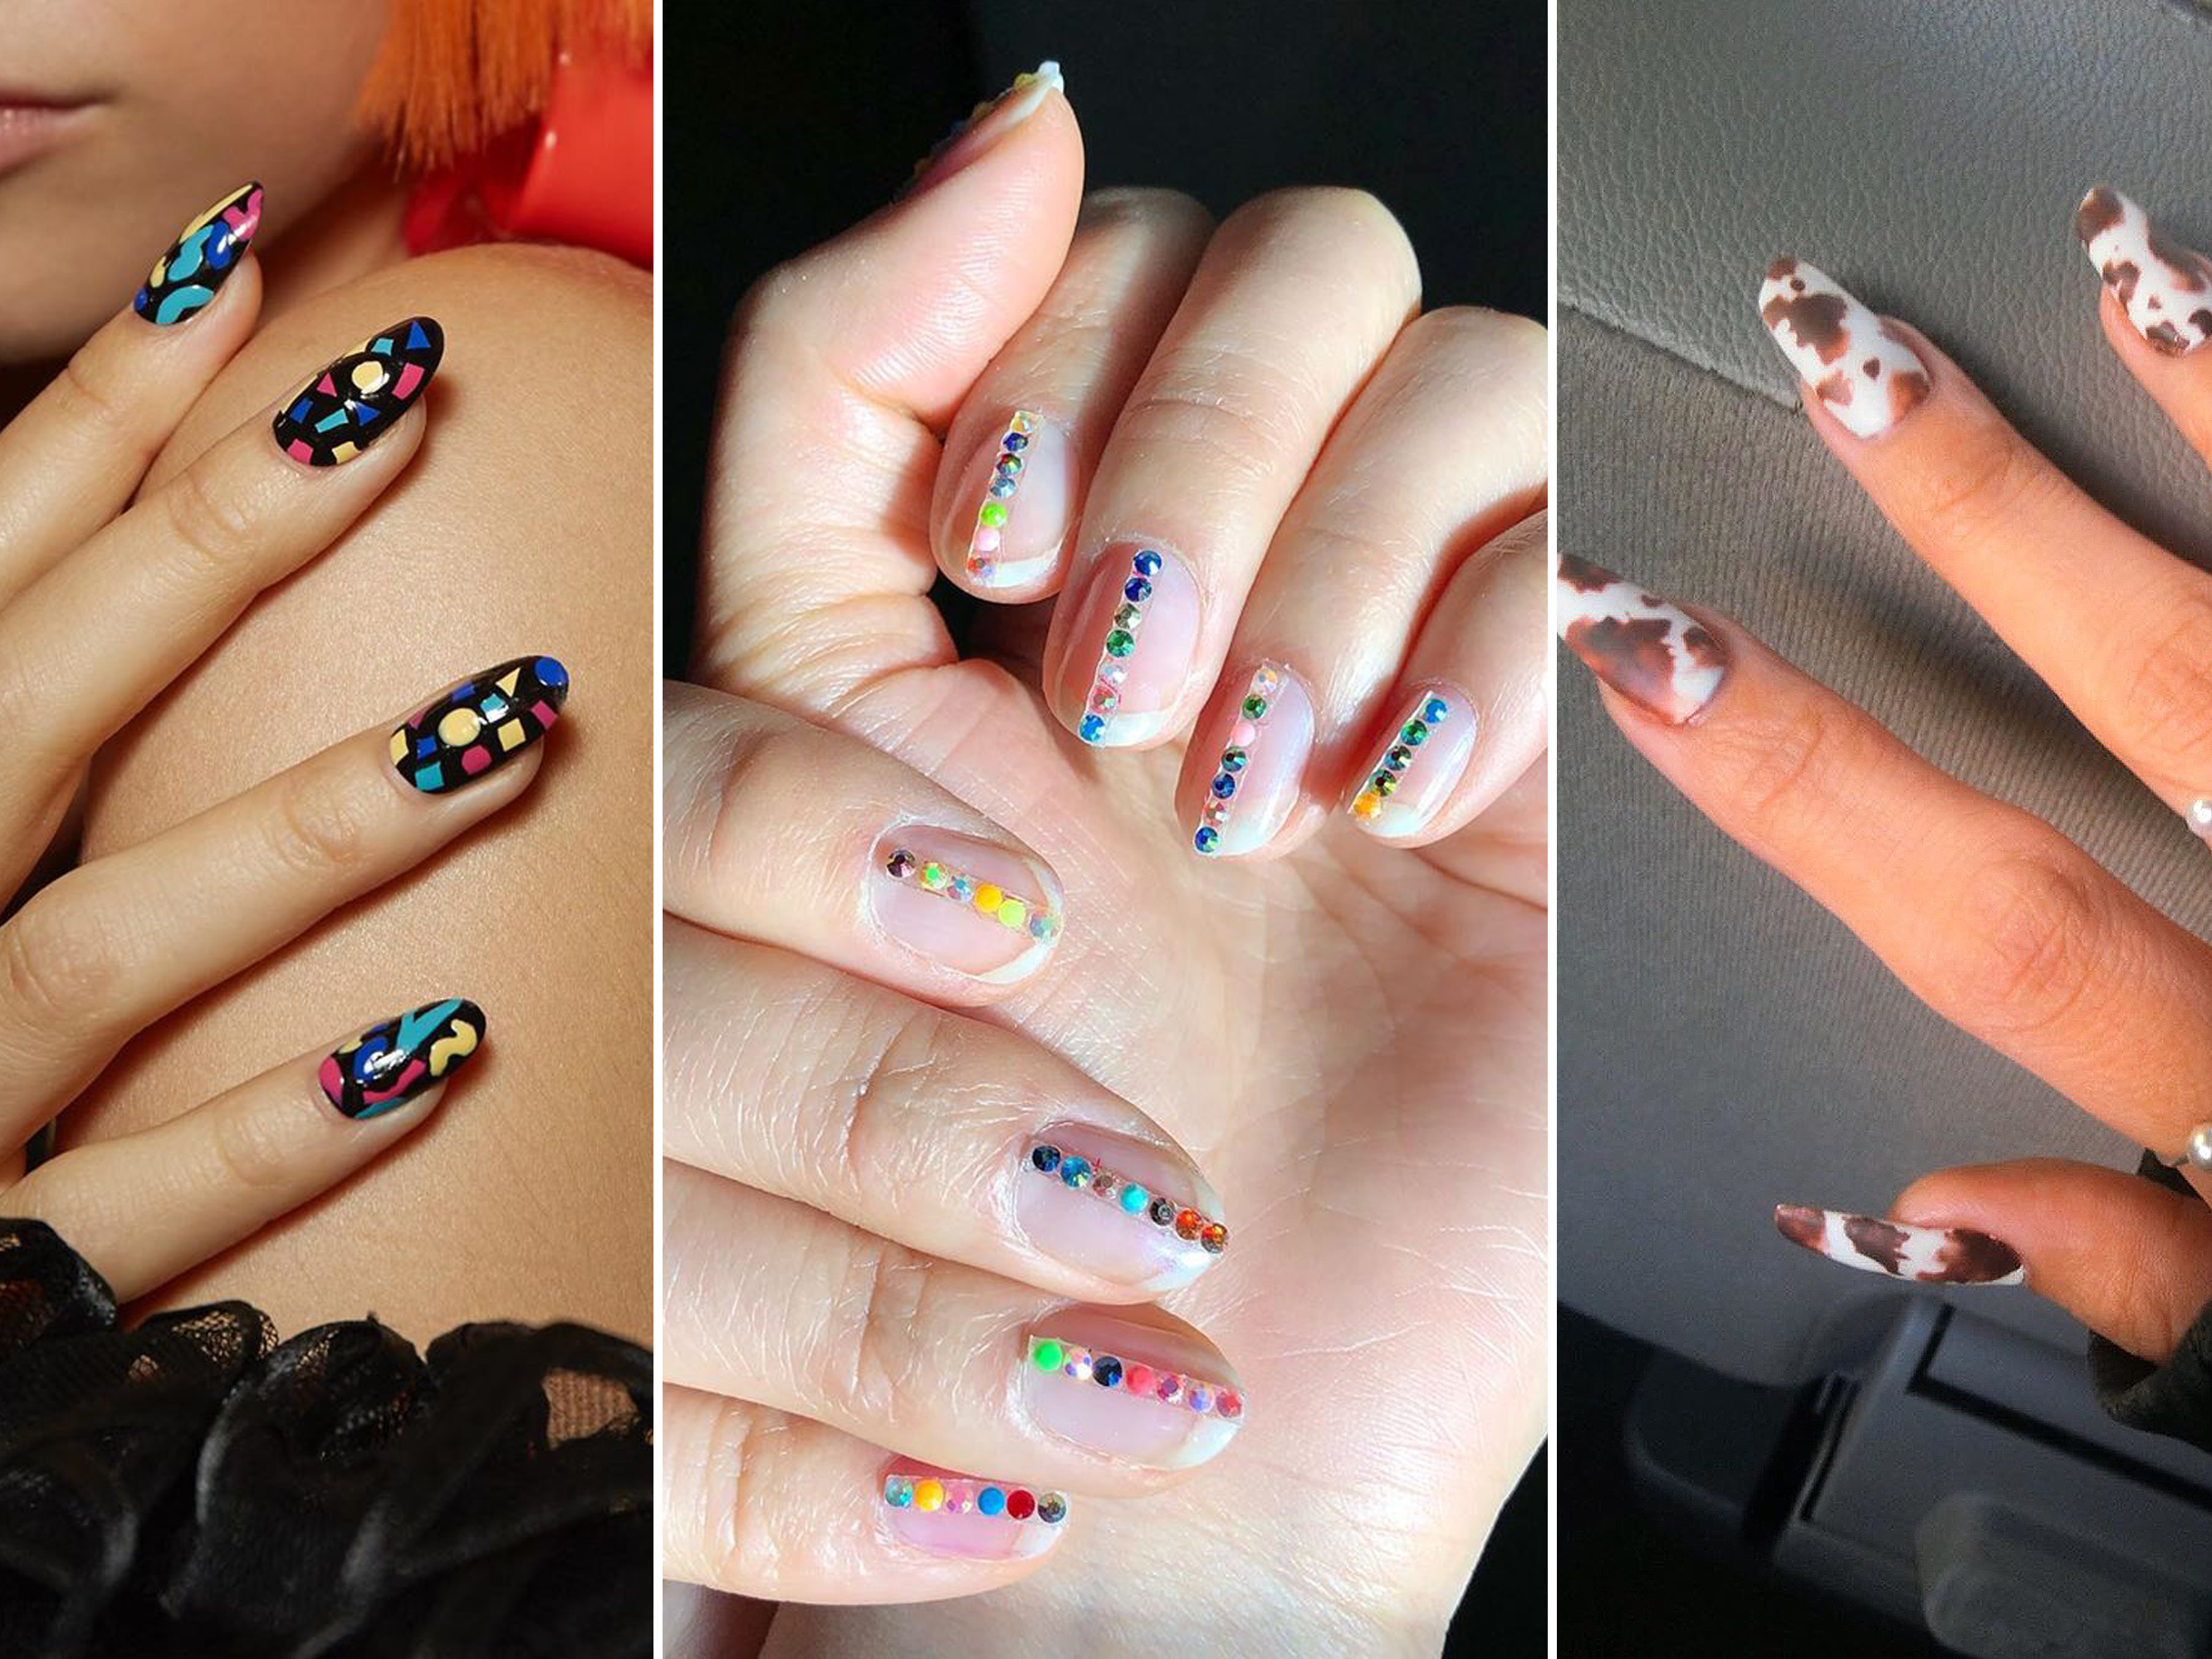 Biggest Nail Art Trends Of 2020 According To Nail Artists Allure